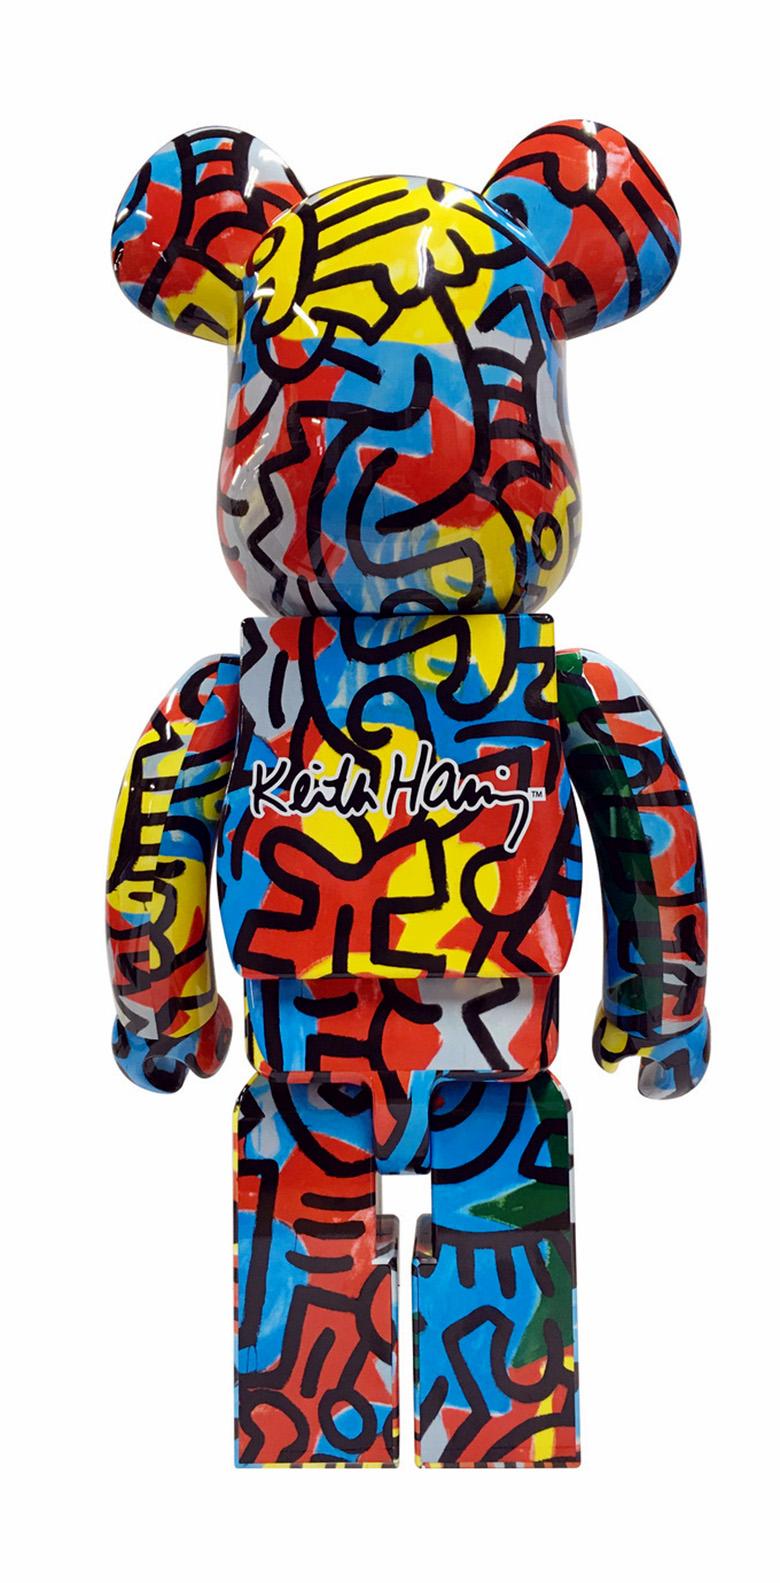 (after) Keith Haring Abstract Sculpture - Keith Haring Bearbrick 1000% (Haring DesignerCon BE@RBRICK)